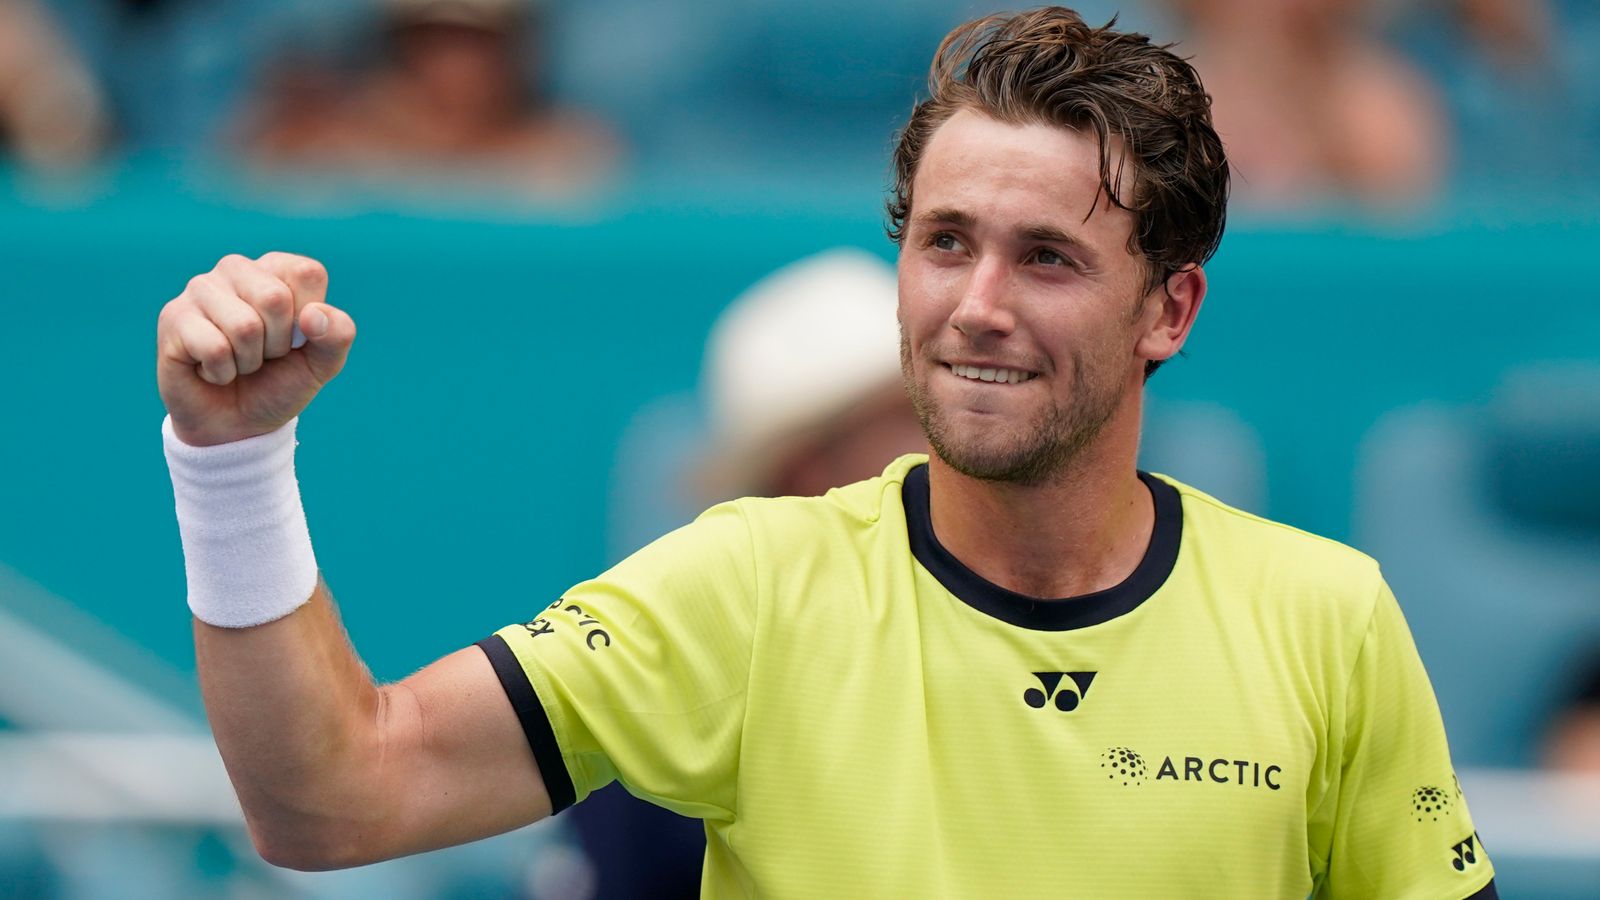 Miami Open Casper Ruud and Carlos Alcaraz to meet in their first ATP